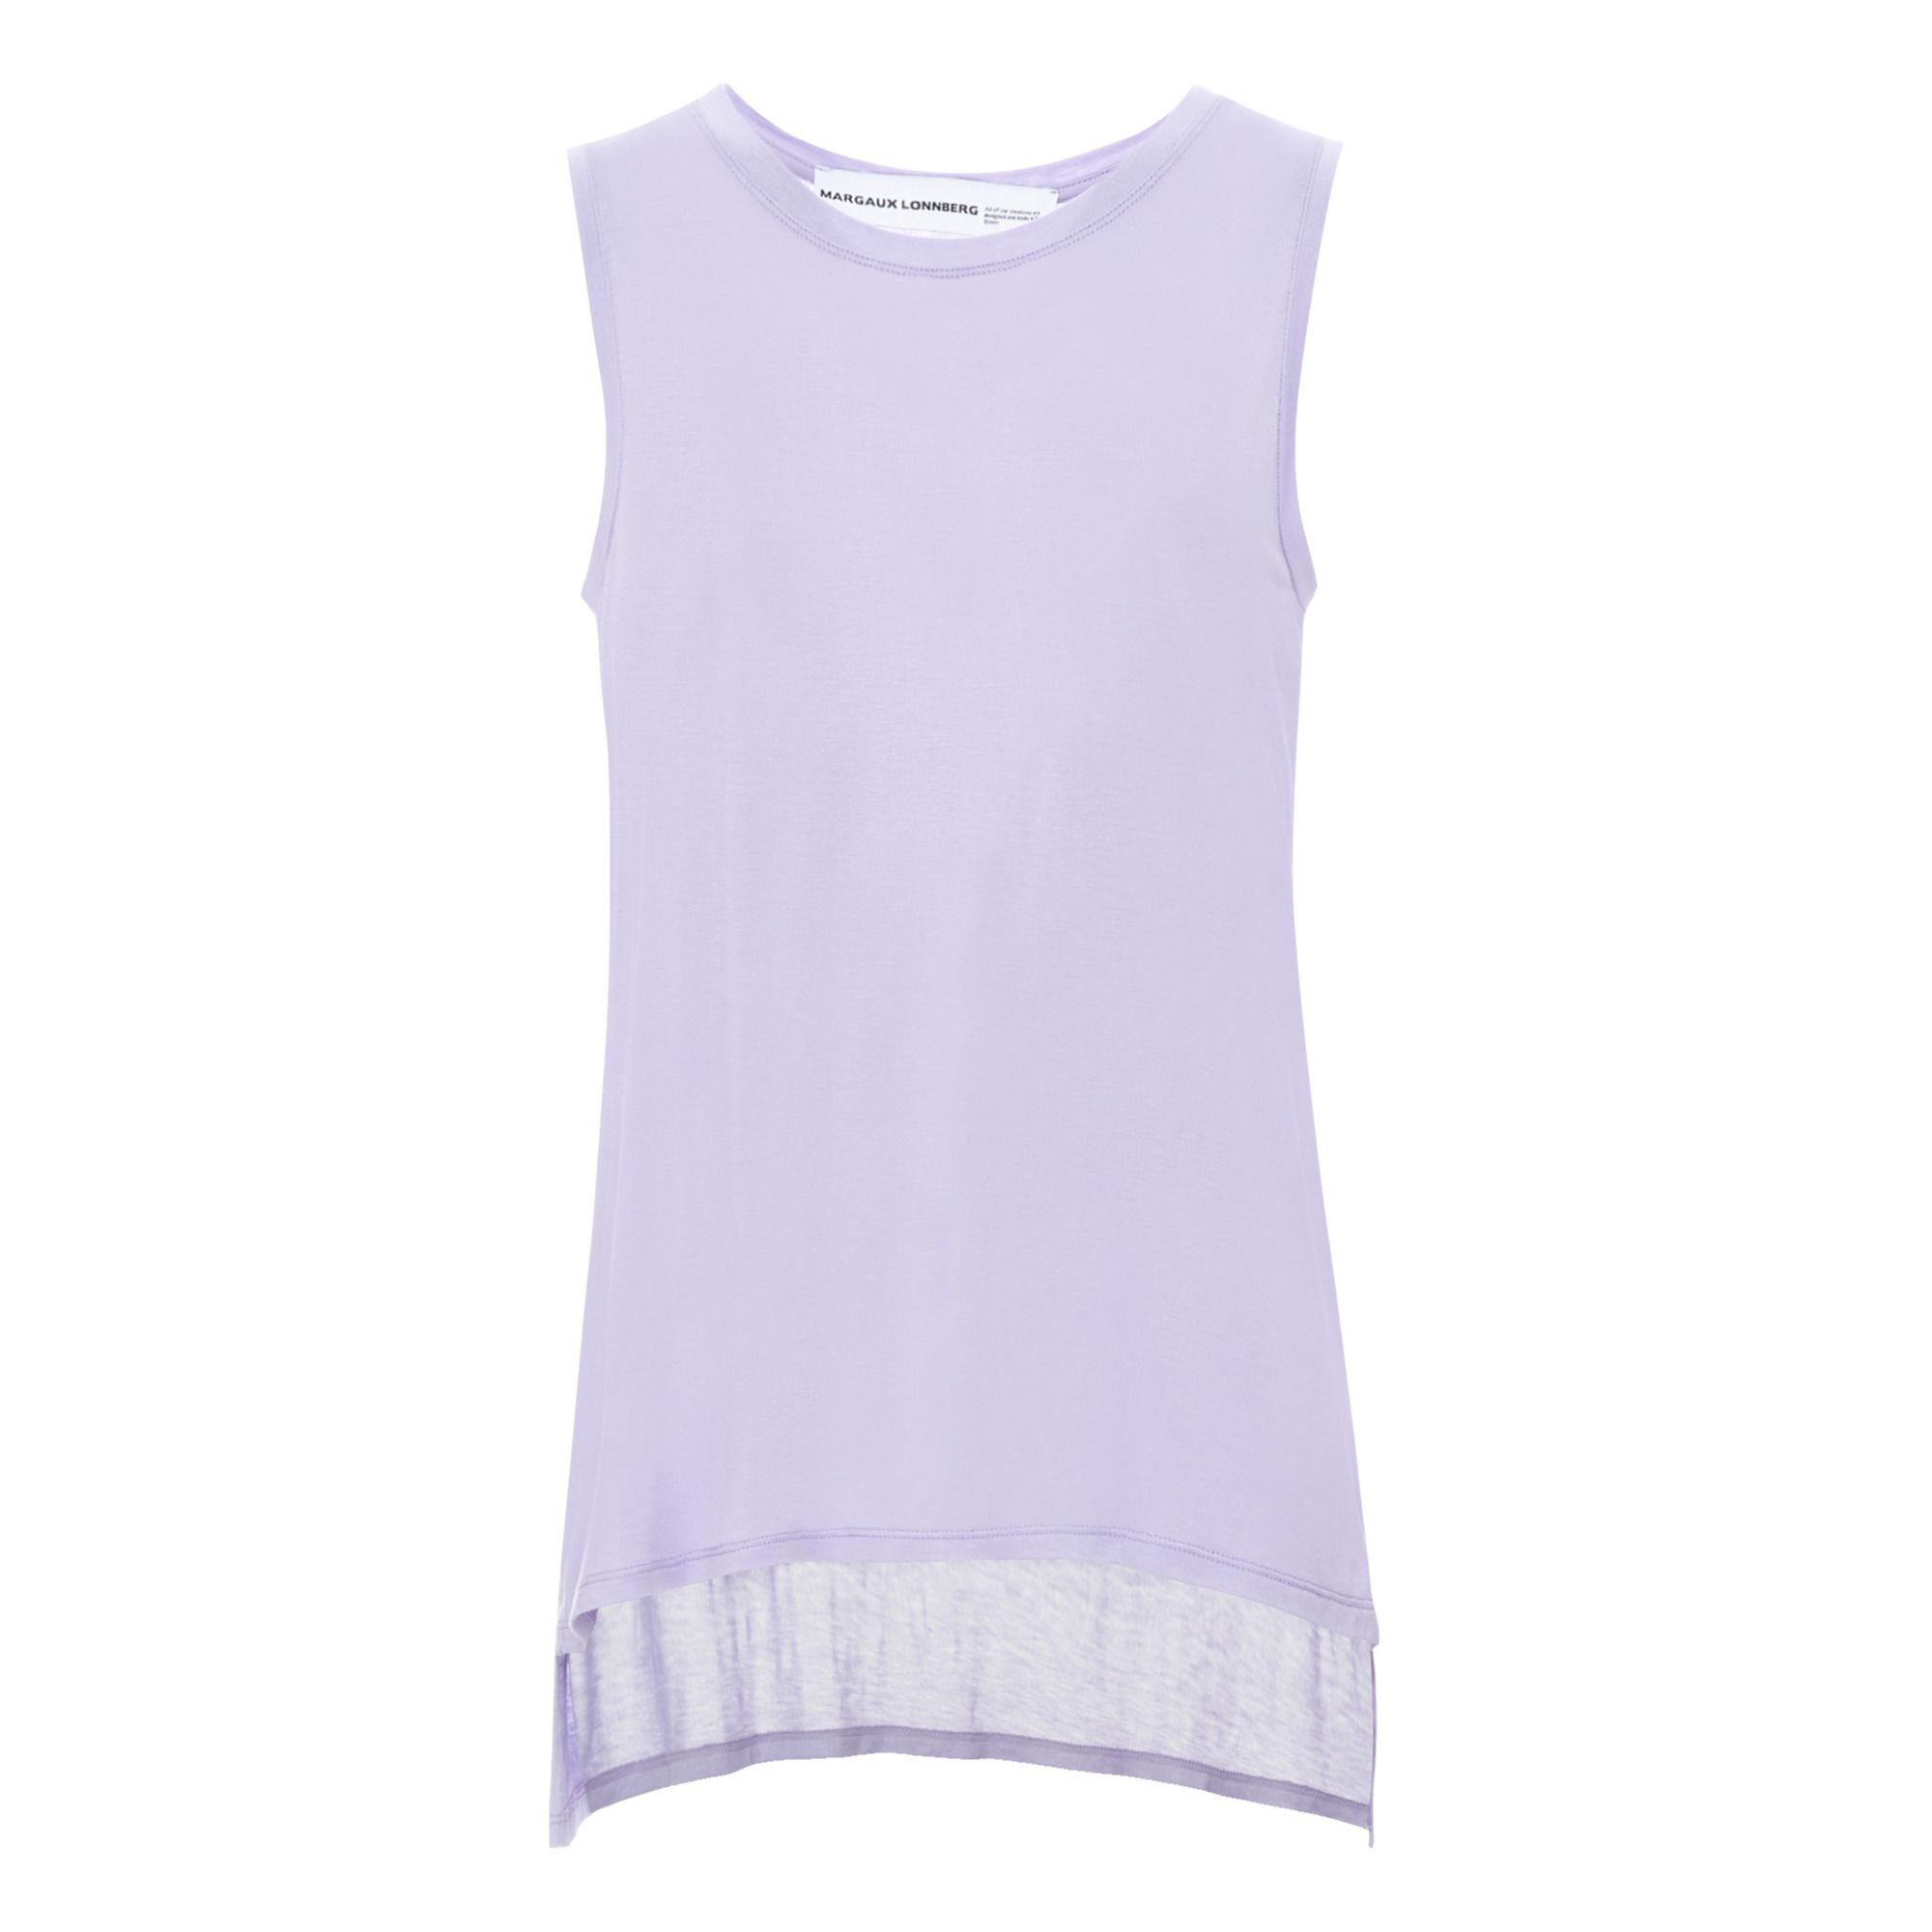 Margaux Lonnberg - T-shirt Tommy - Femme - Lilas